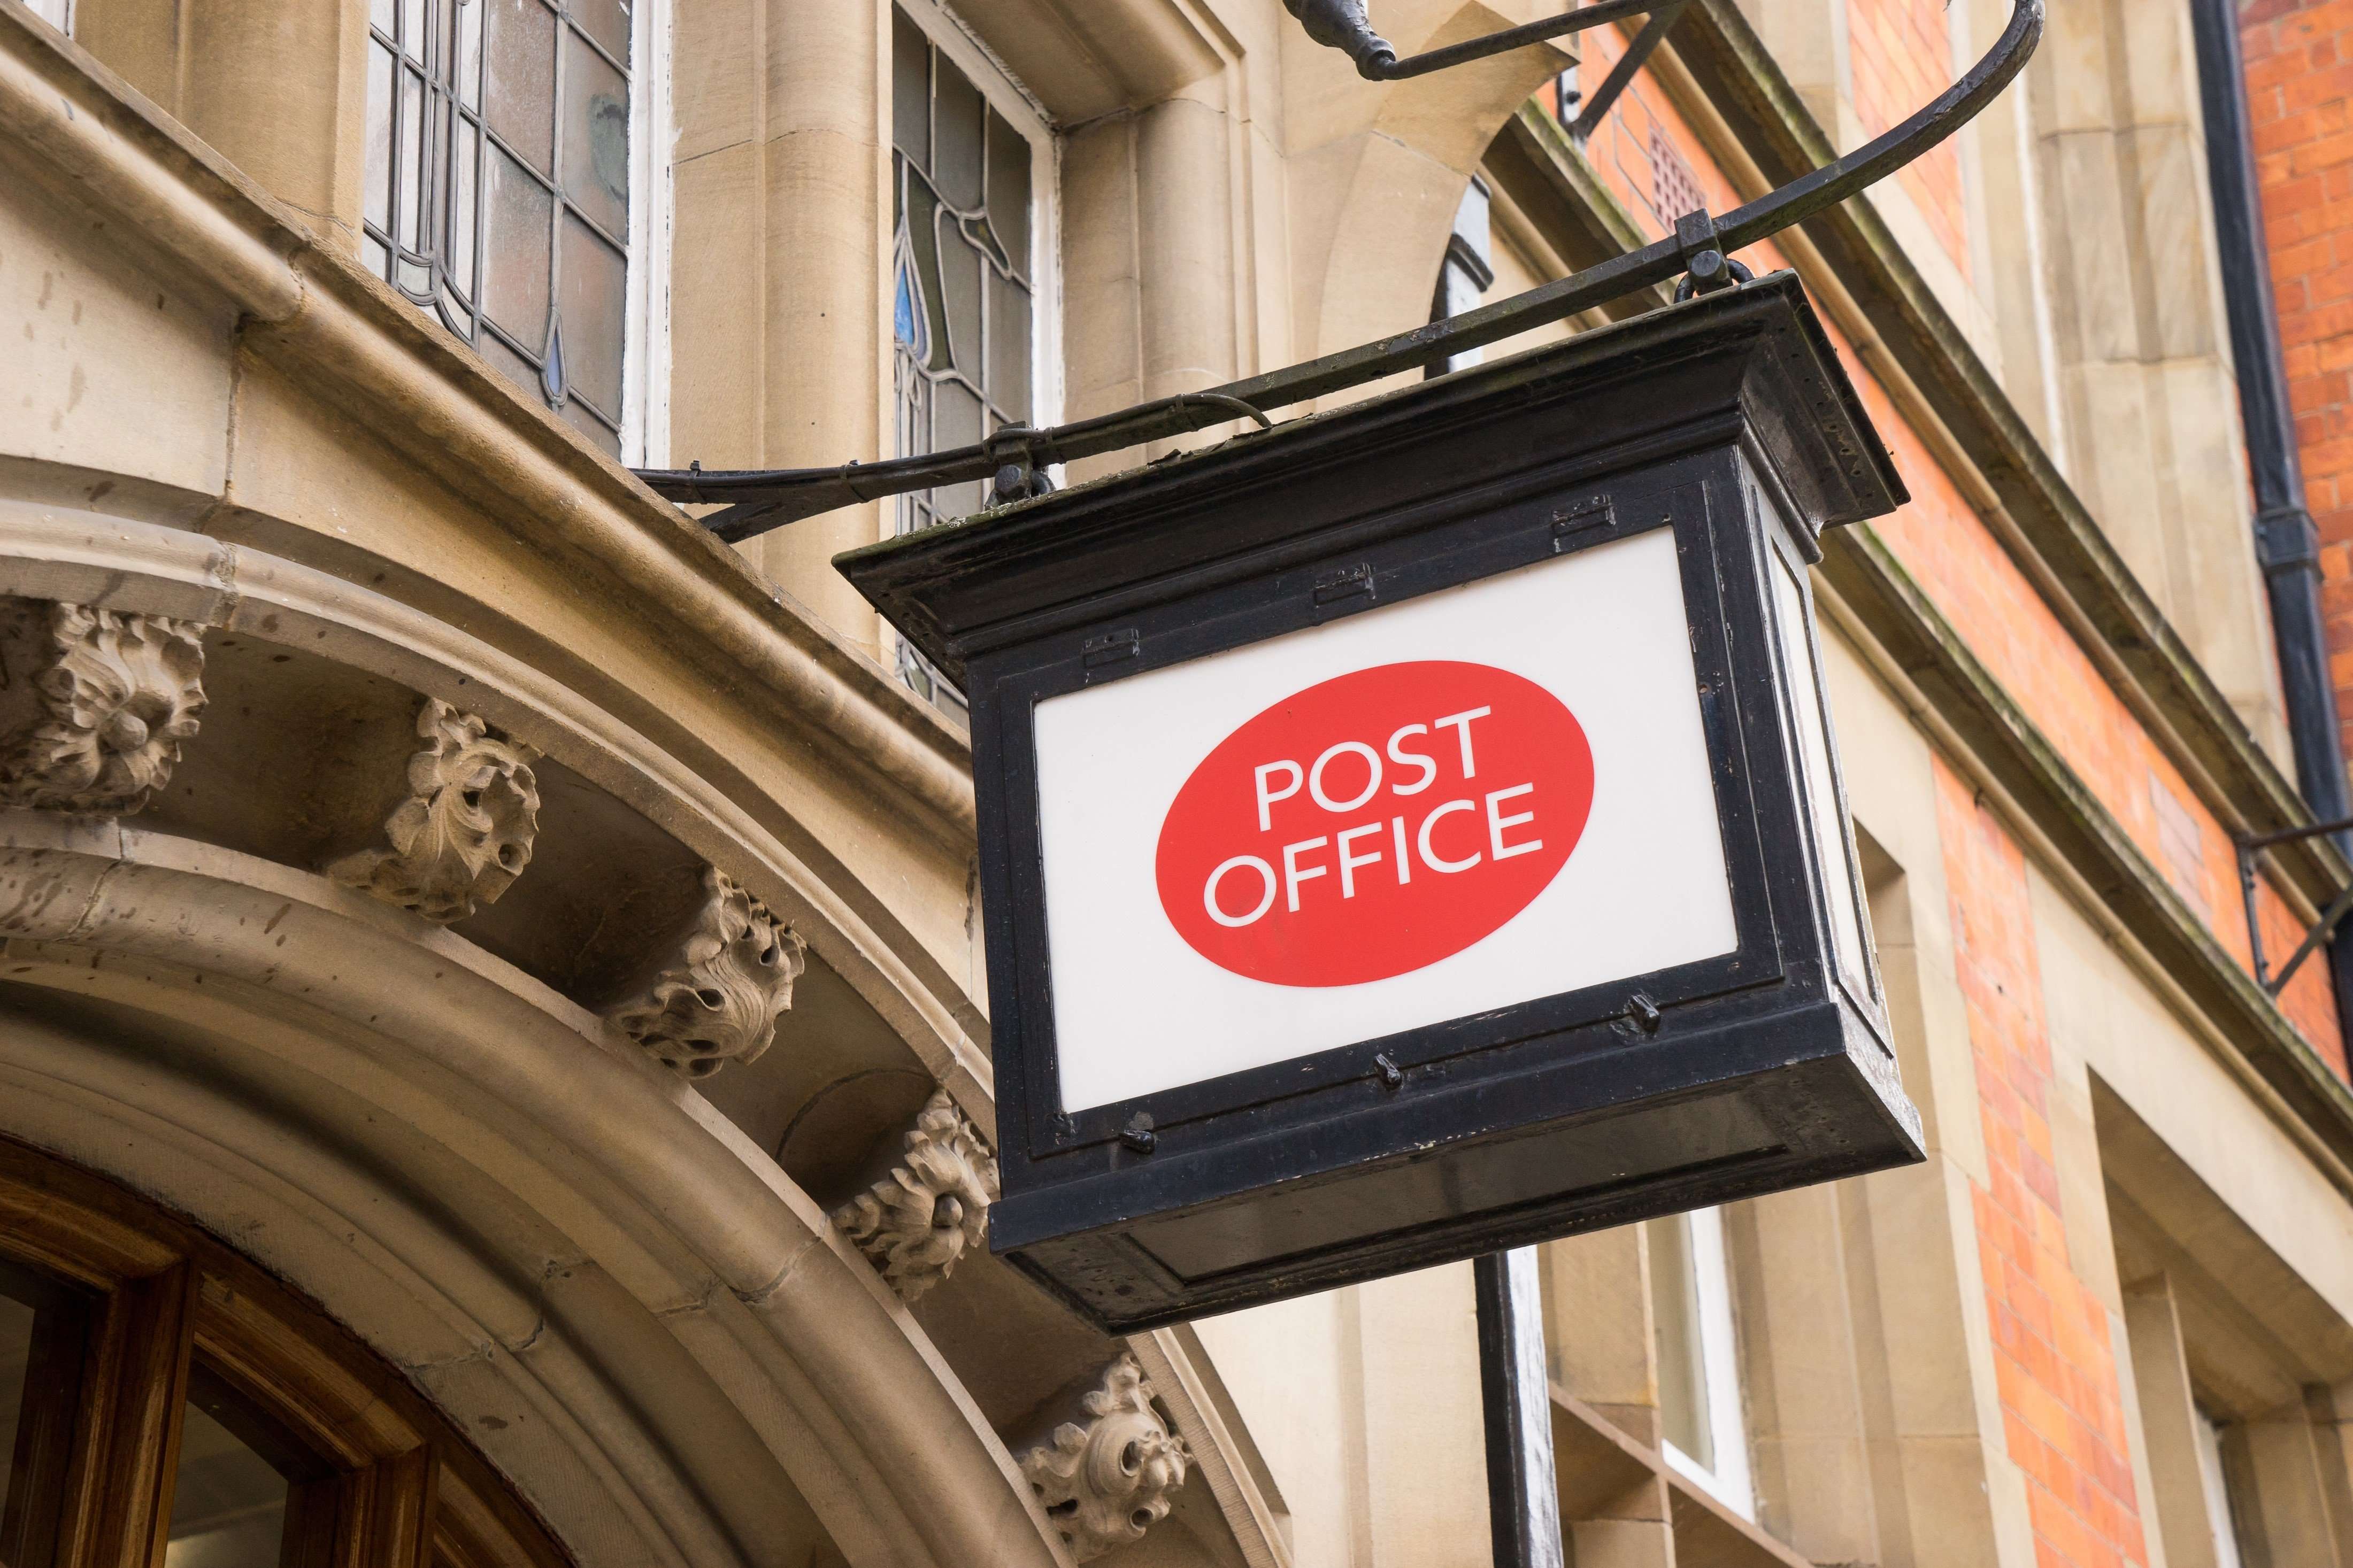 The Post Office scandal: A turning point in brand ethics and reputation management